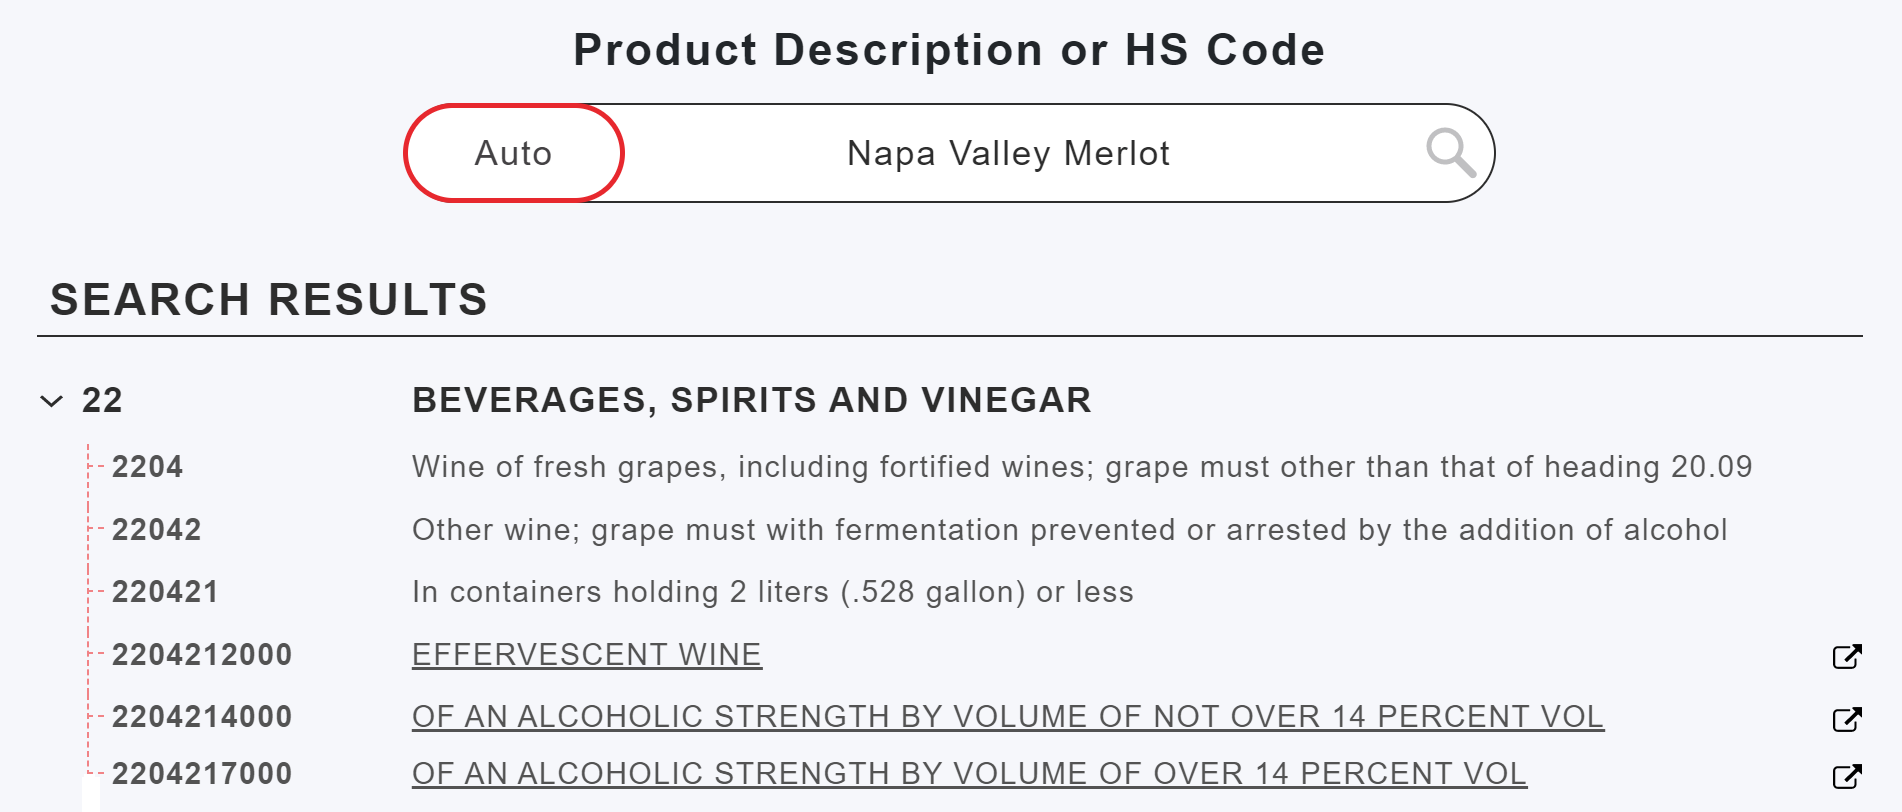 US Schedule B for Napa Valley Merlot using CALISTA Intelligent Agent (CIA)